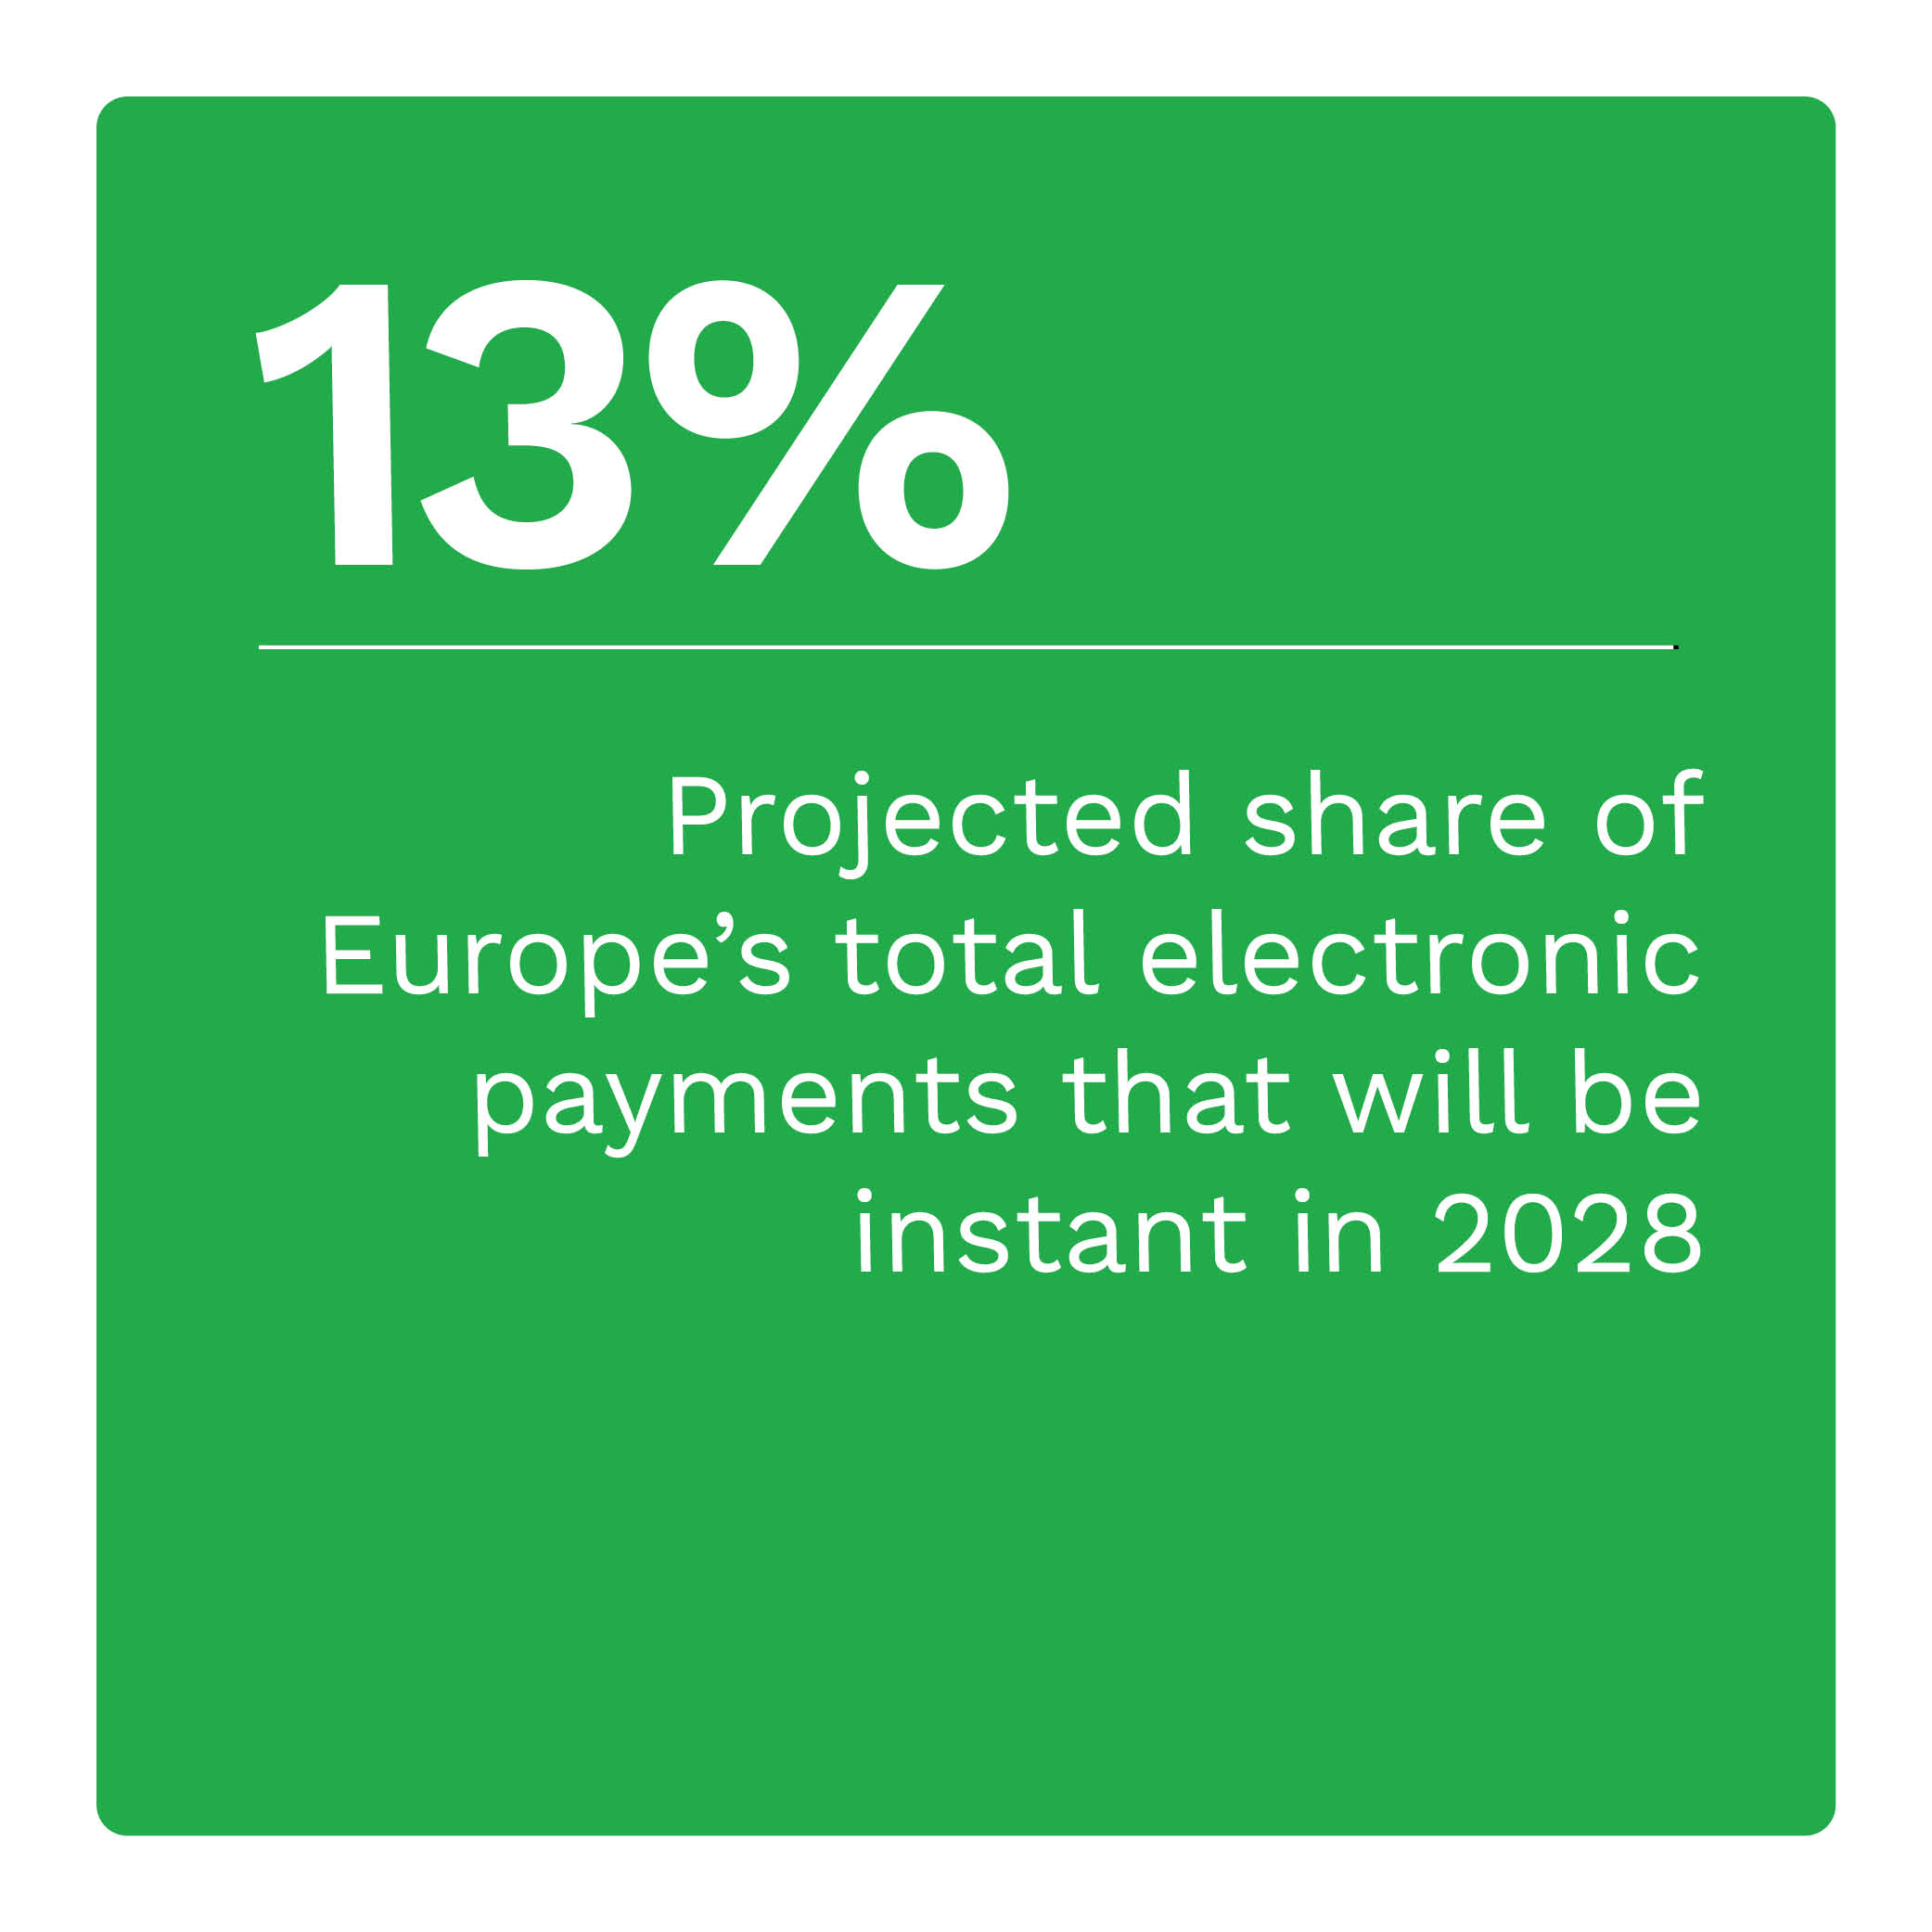 13%: Projected share of Europe’s total electronic payments that will be instant in 2028